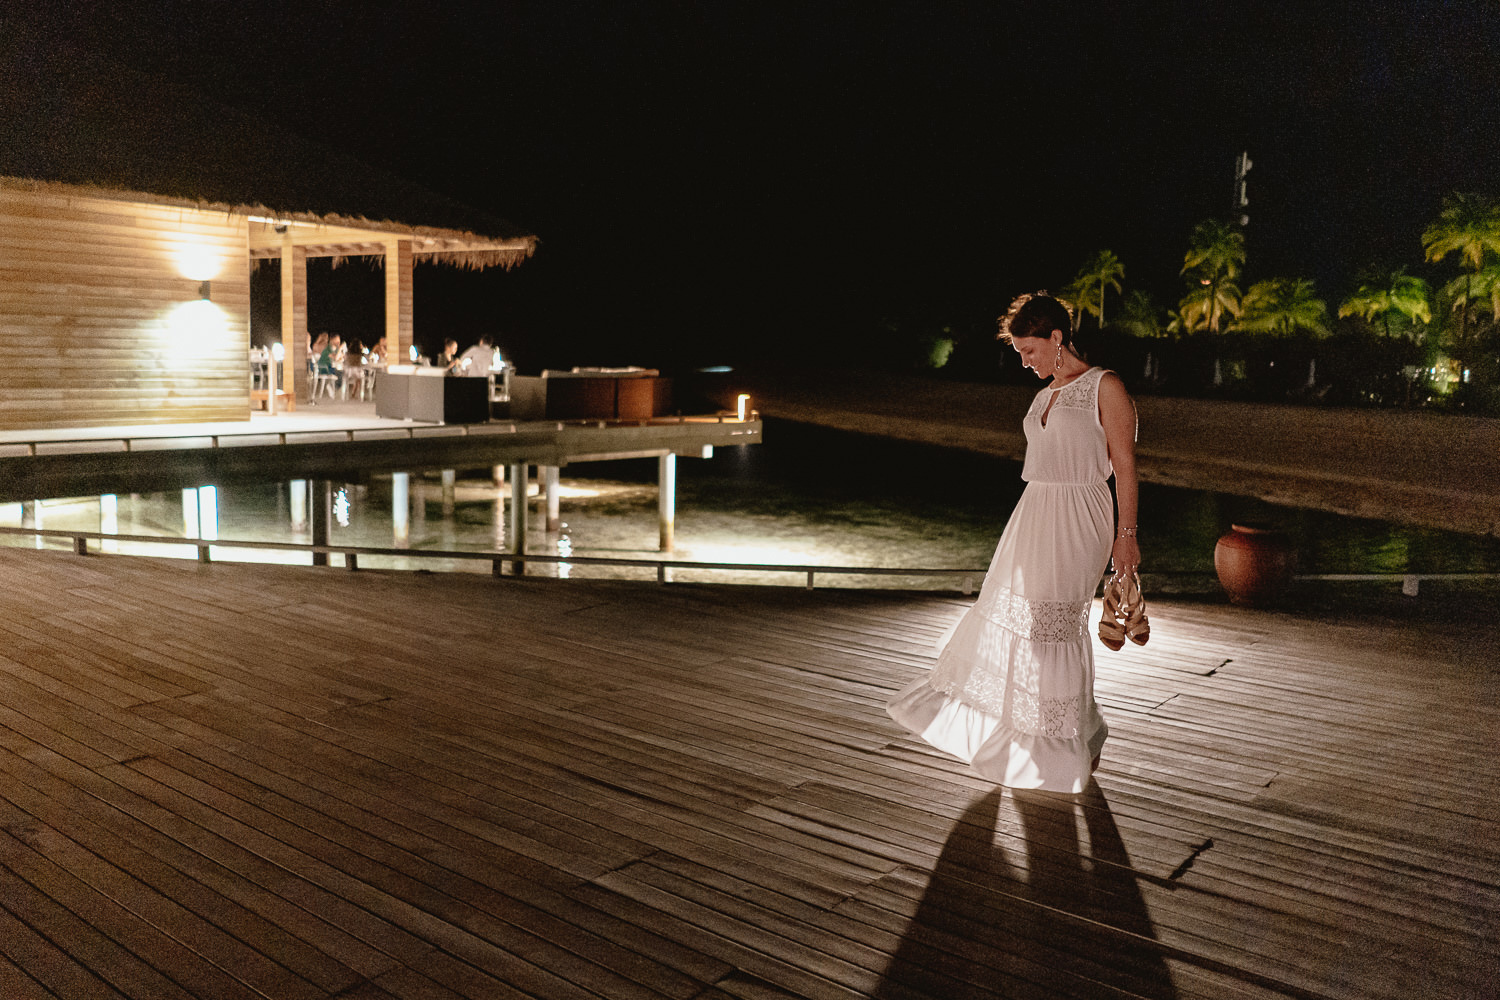 wedding photographer in maldives anniversary trip cocoon romantic private dinner evening